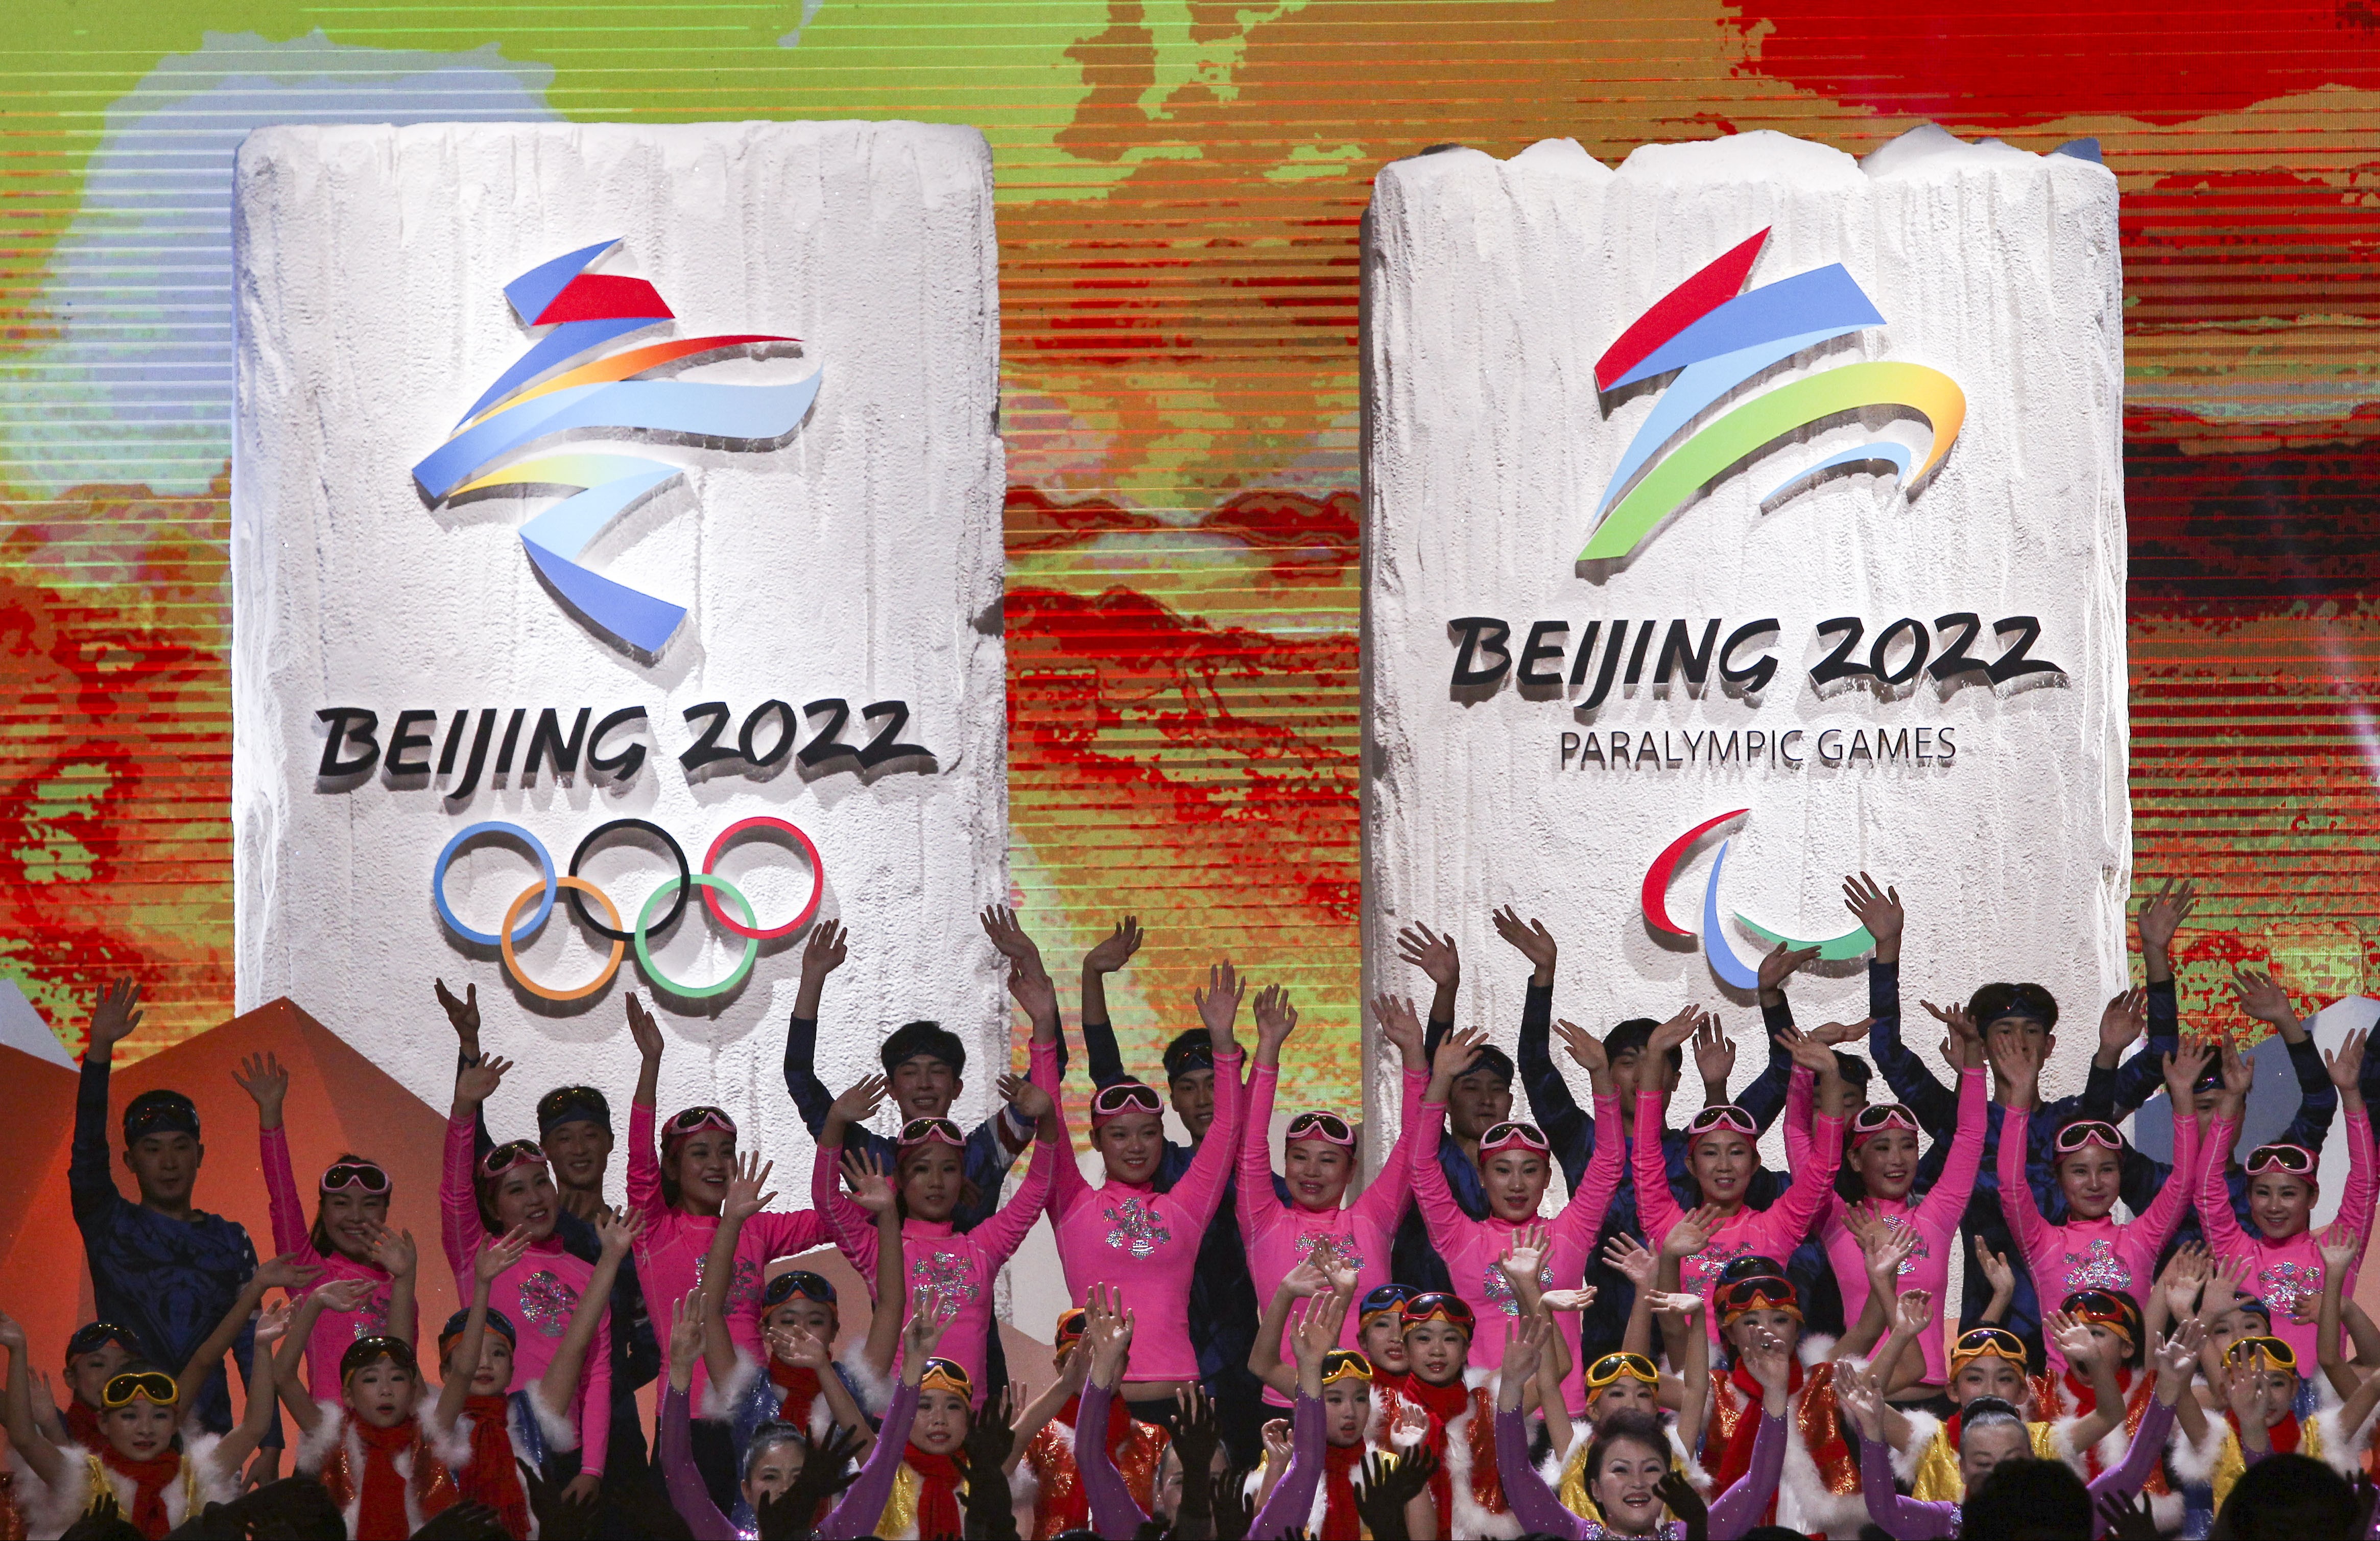 The emblems of the Beijing 2022 Olympic and Paralympic Winter Games being officially launched. Photo: Simon Song